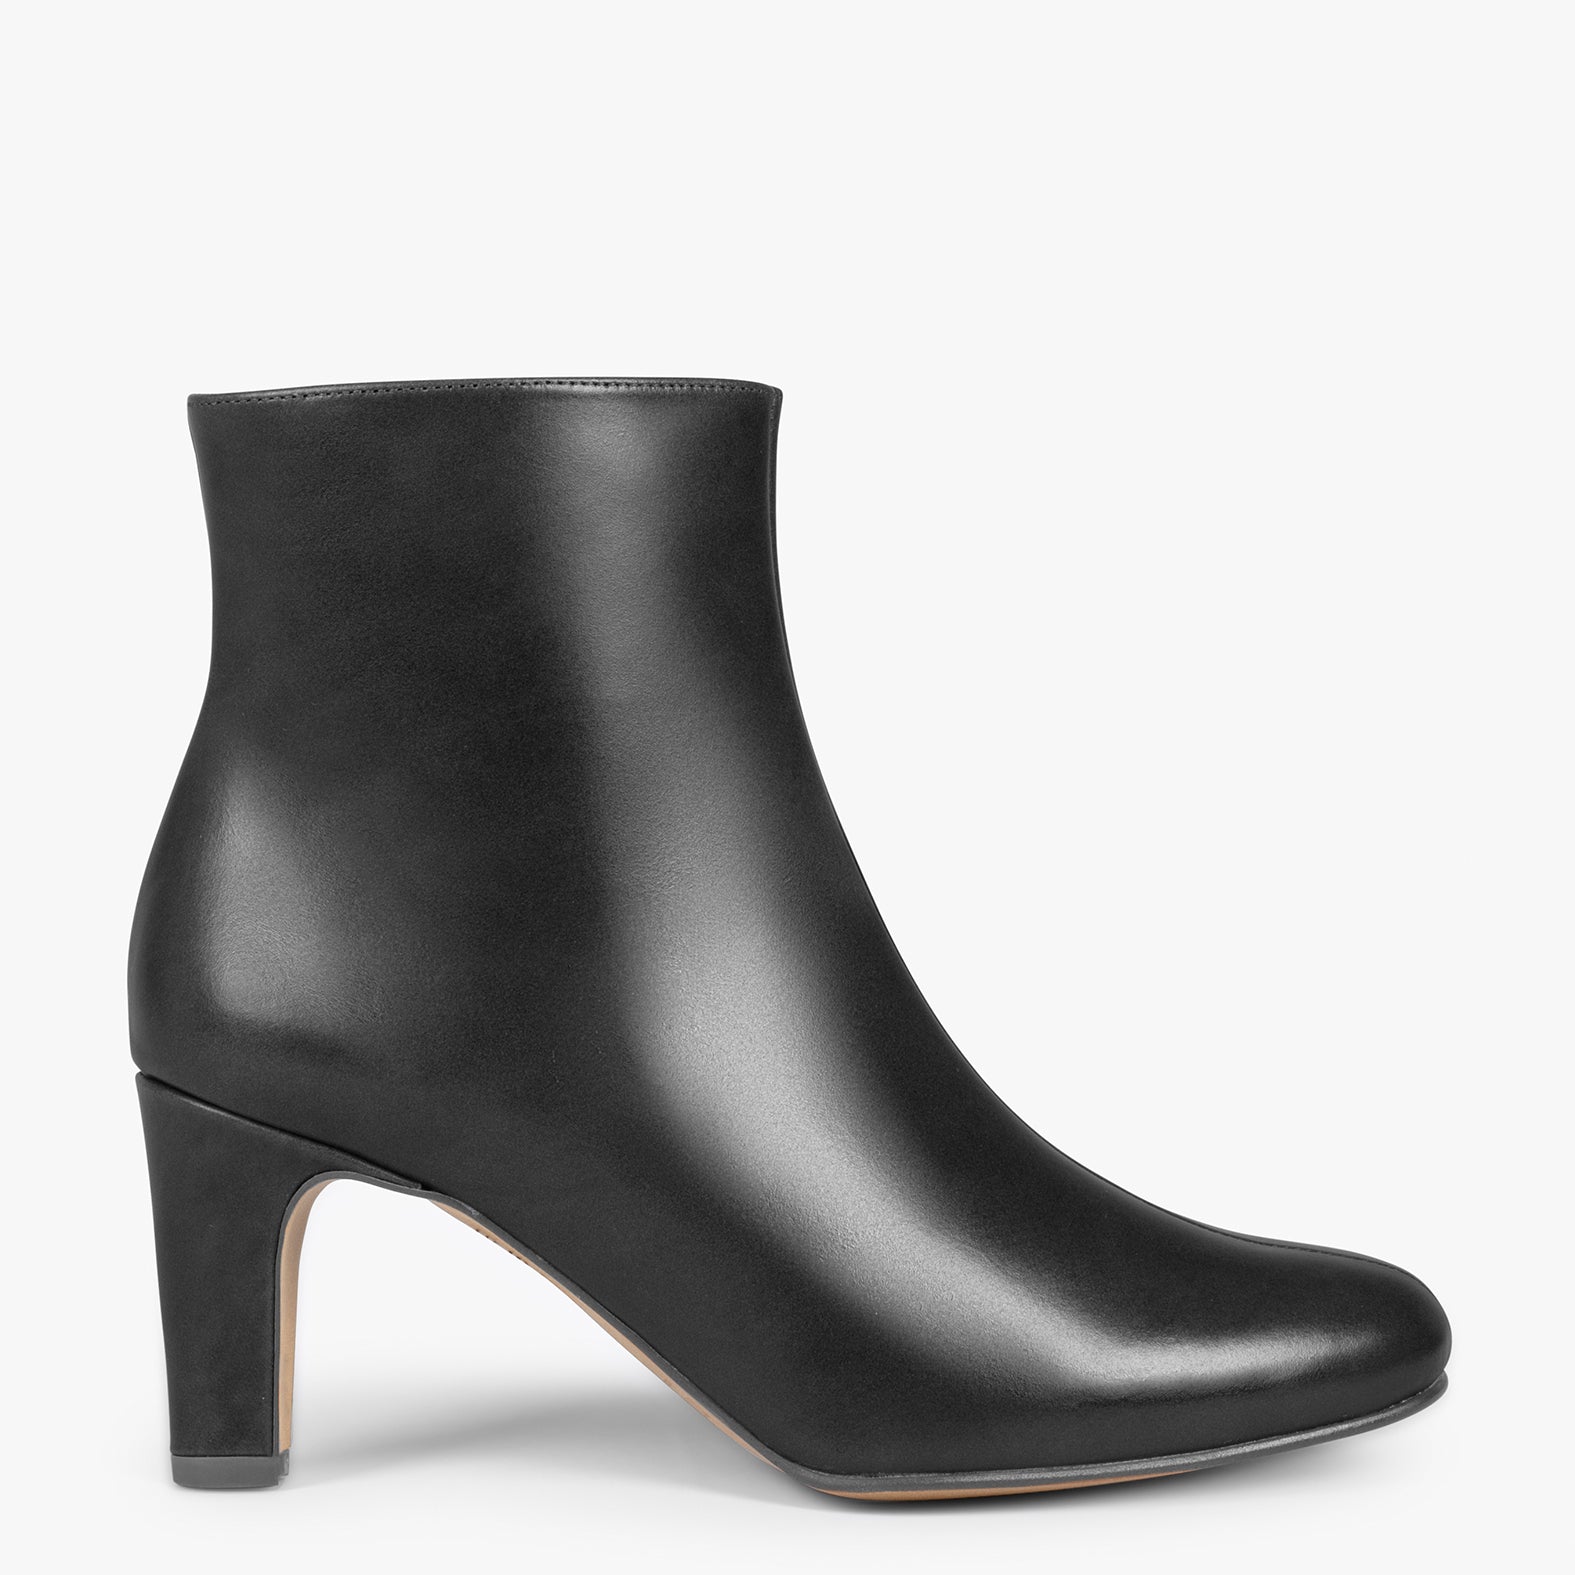 DAILY – BLACK leather bootie | miMaO